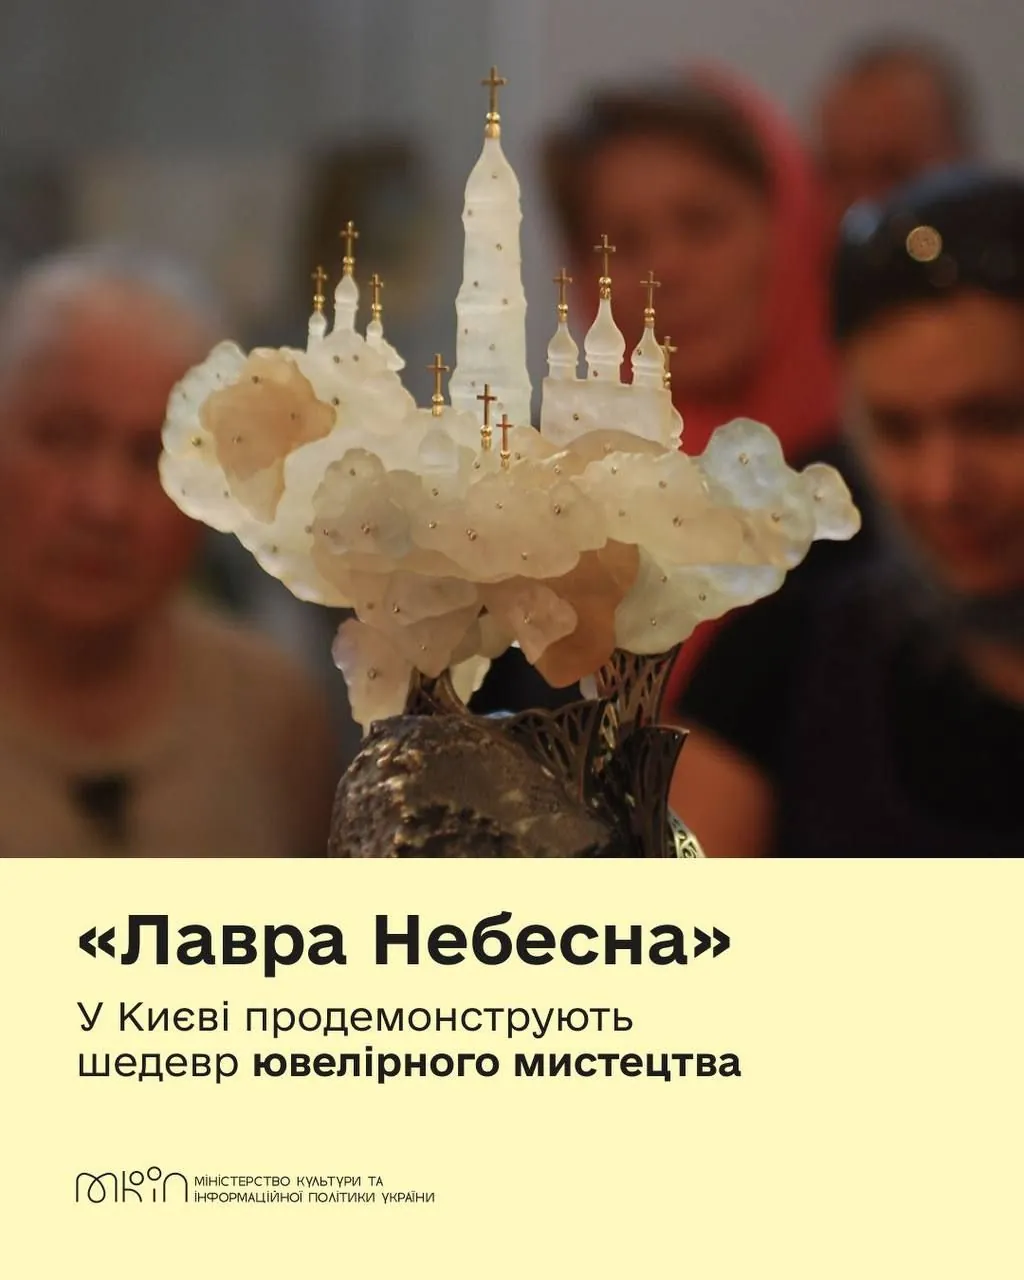 jewelry-art-composition-lavra-of-heaven-will-be-presented-at-the-exhibition-in-kiev